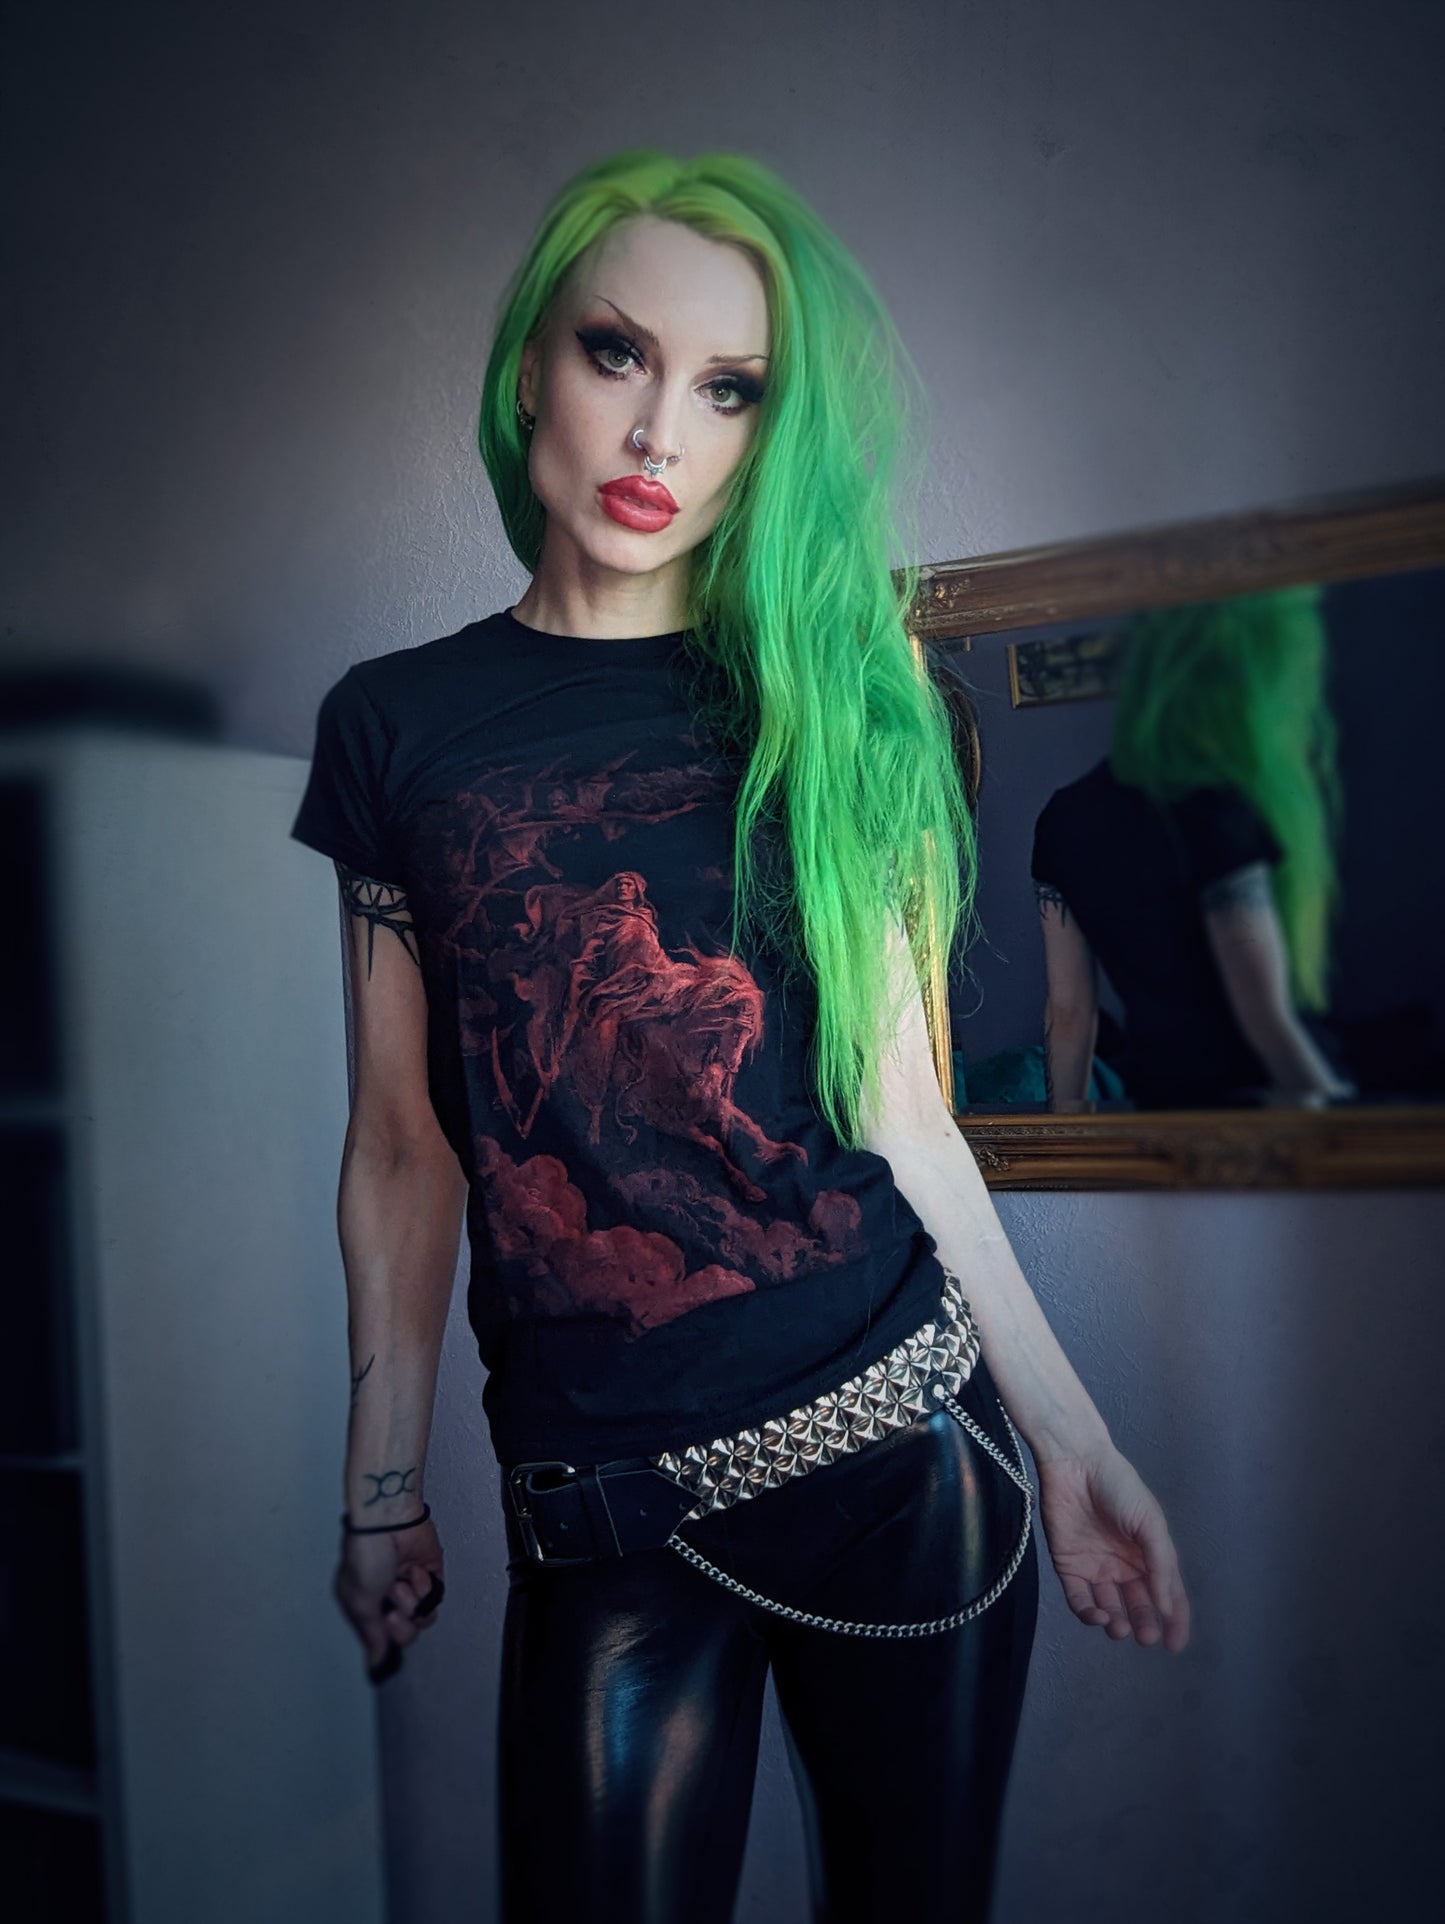 DEATH red edition, Gustave Dore illustration - T-shirt female fitted